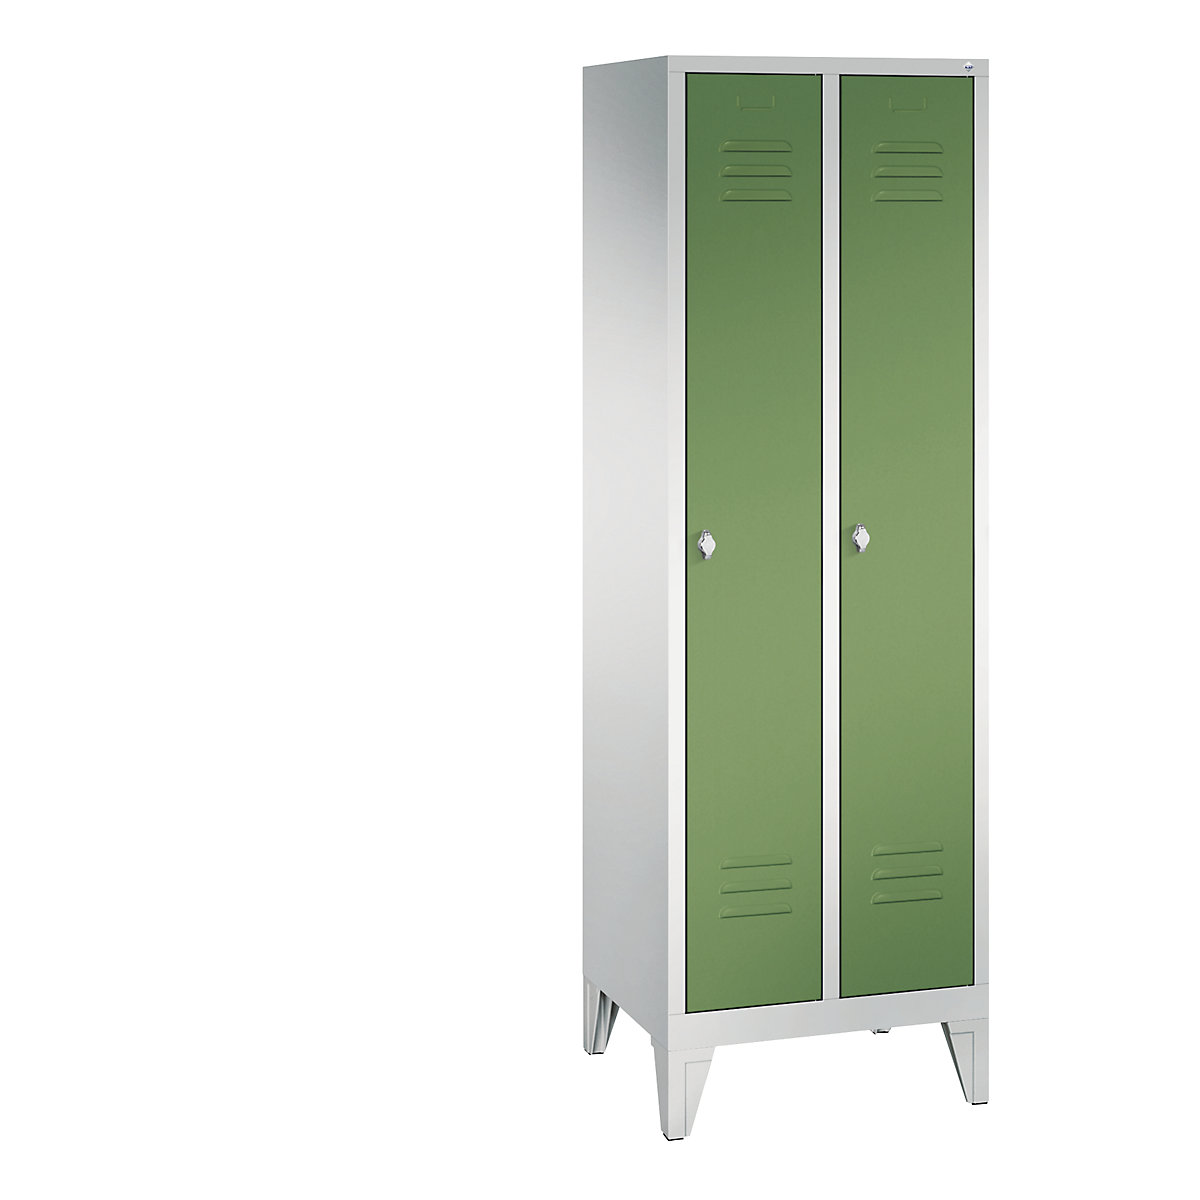 CLASSIC cloakroom locker with feet – C+P, 2 compartments, compartment width 300 mm, light grey / reseda green-13